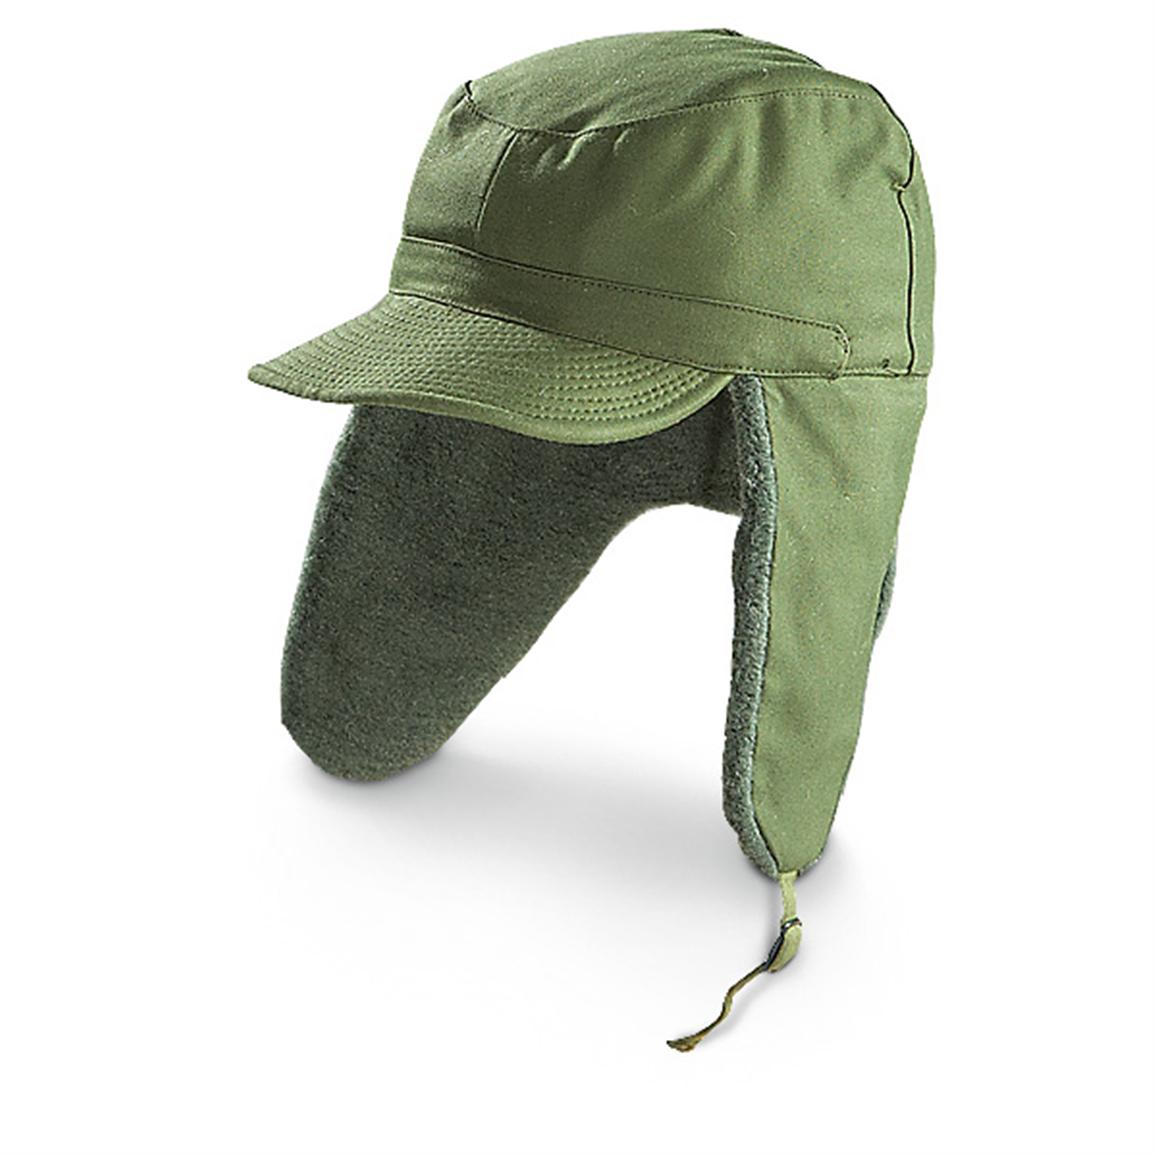 New Swedish Military Winter Hat Olive Drab 230383 Hats And Caps At